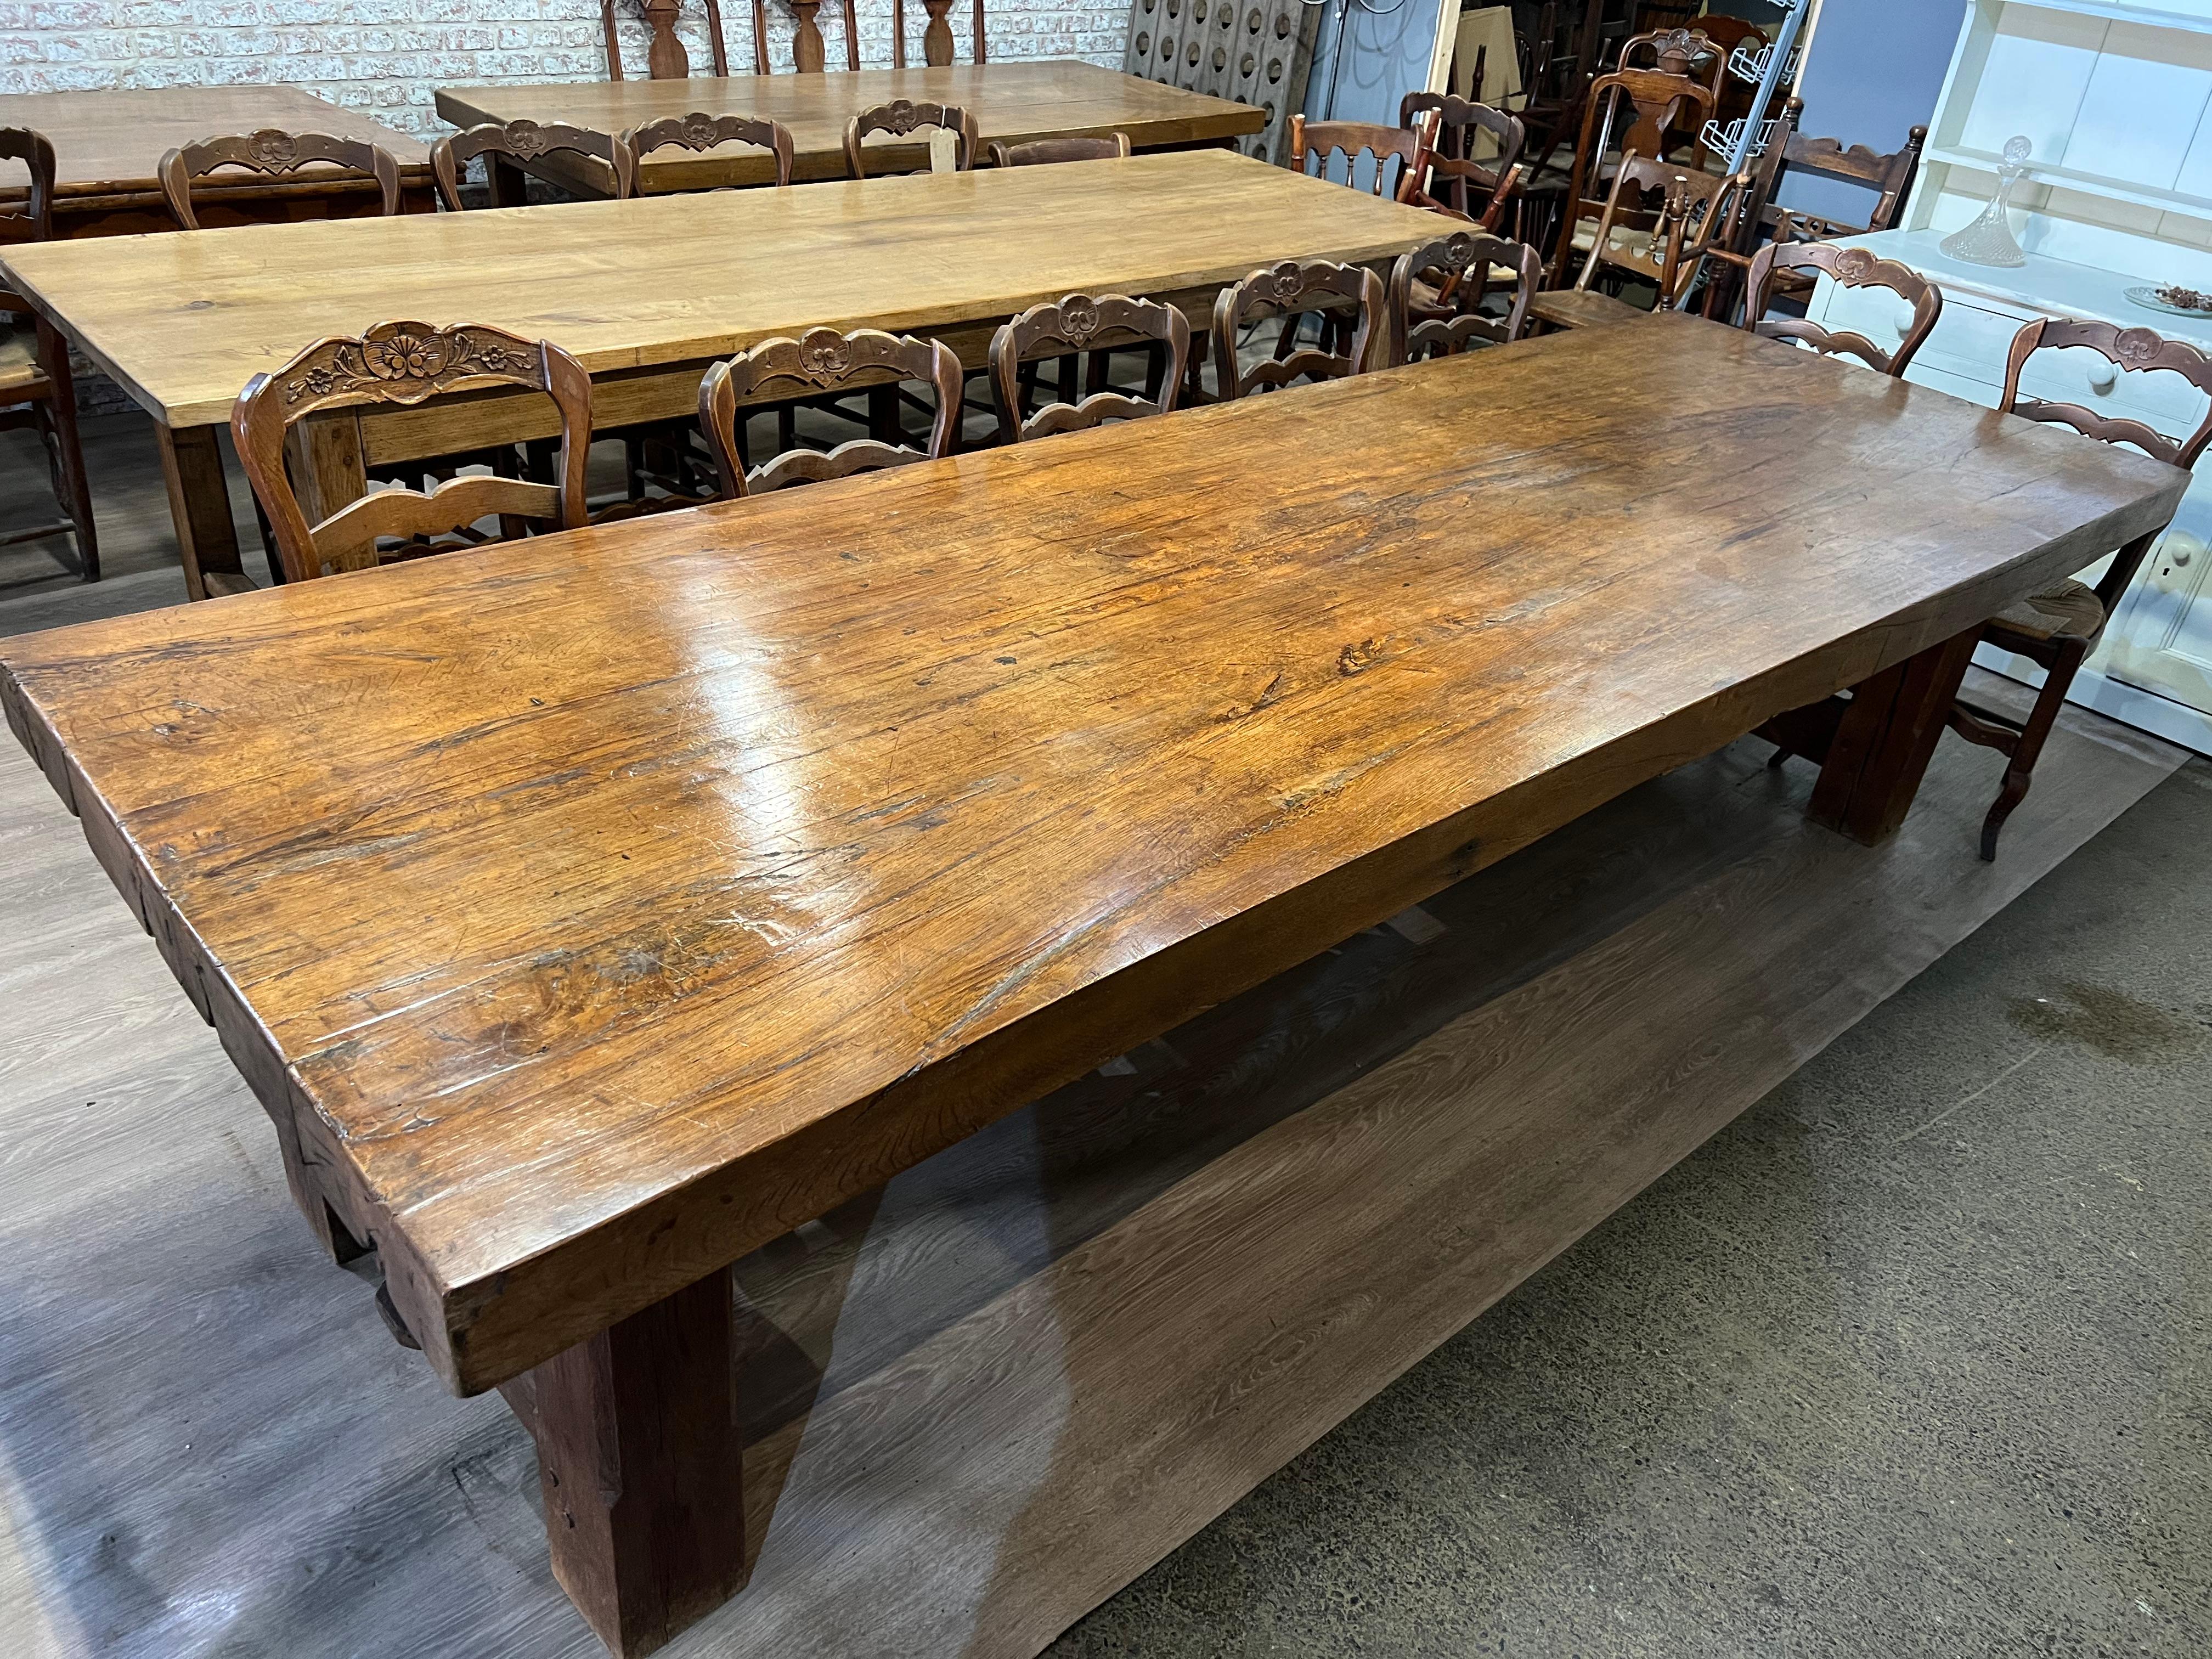 French Provincial Large Rustic Oak Farmhouse Table with Thick Top